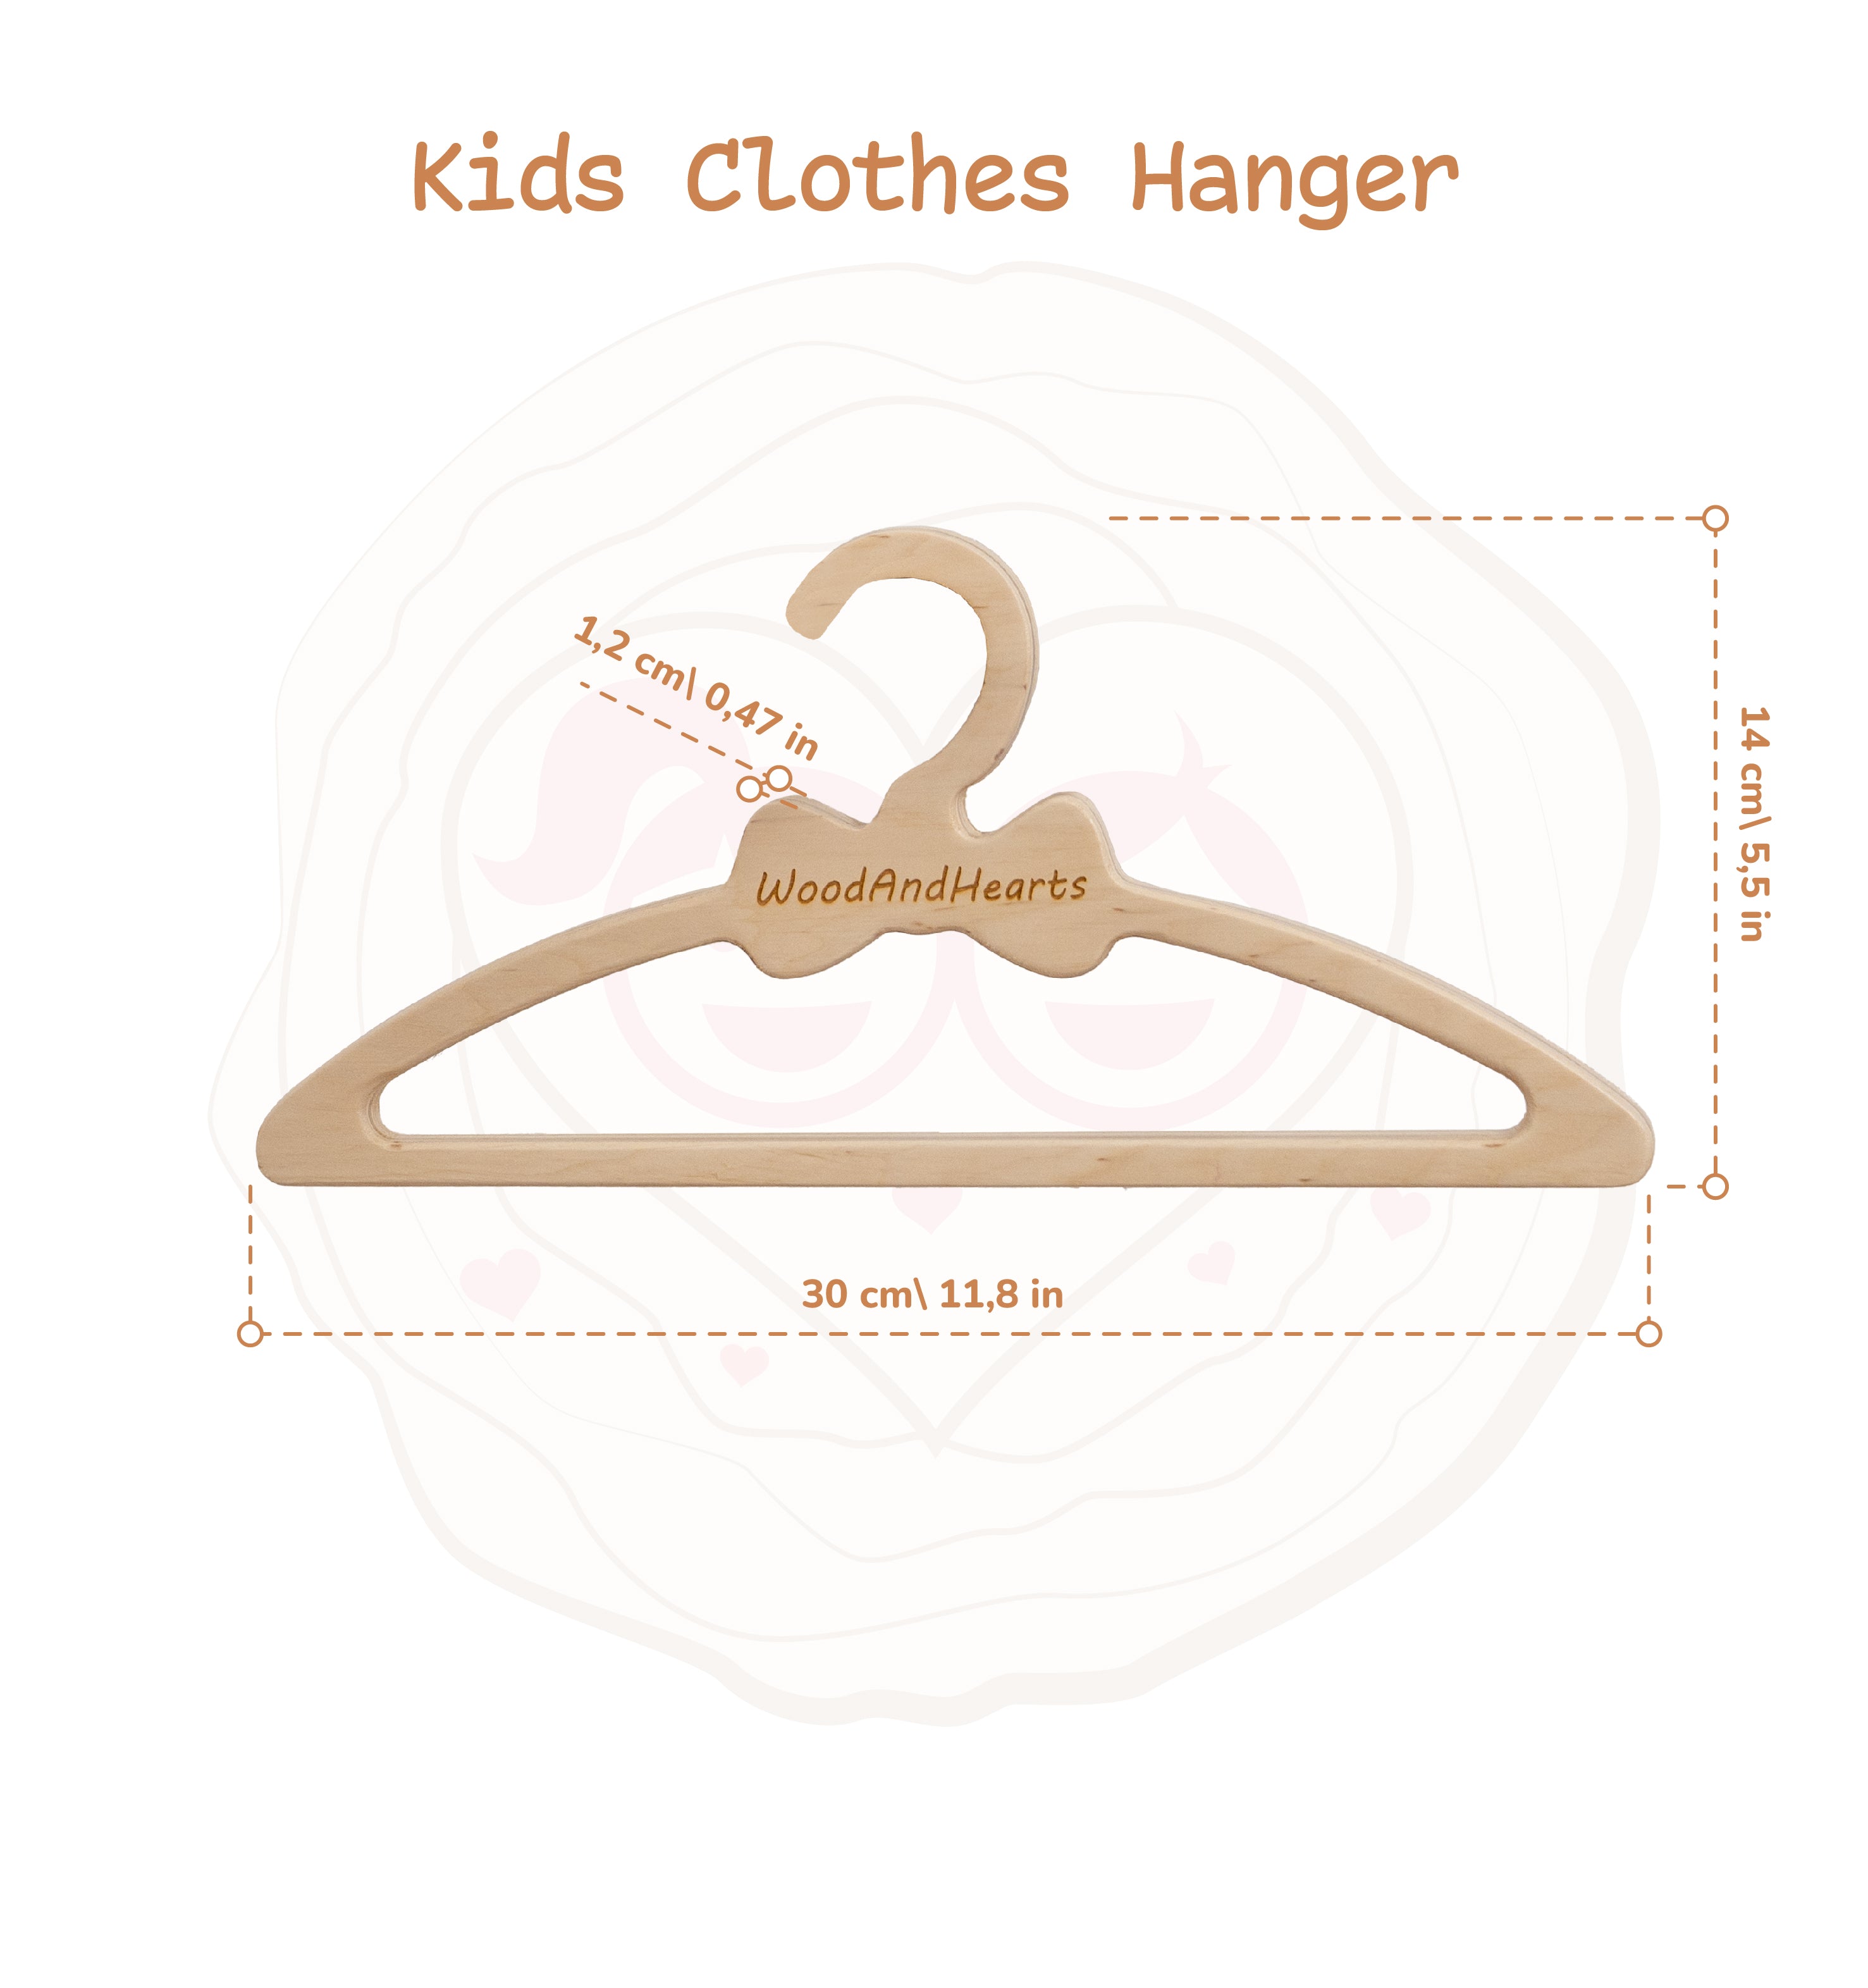 CHILDREN'S HANGERS AND OTHER ORGANIZATION TIPS EVERY PARENT NEEDS